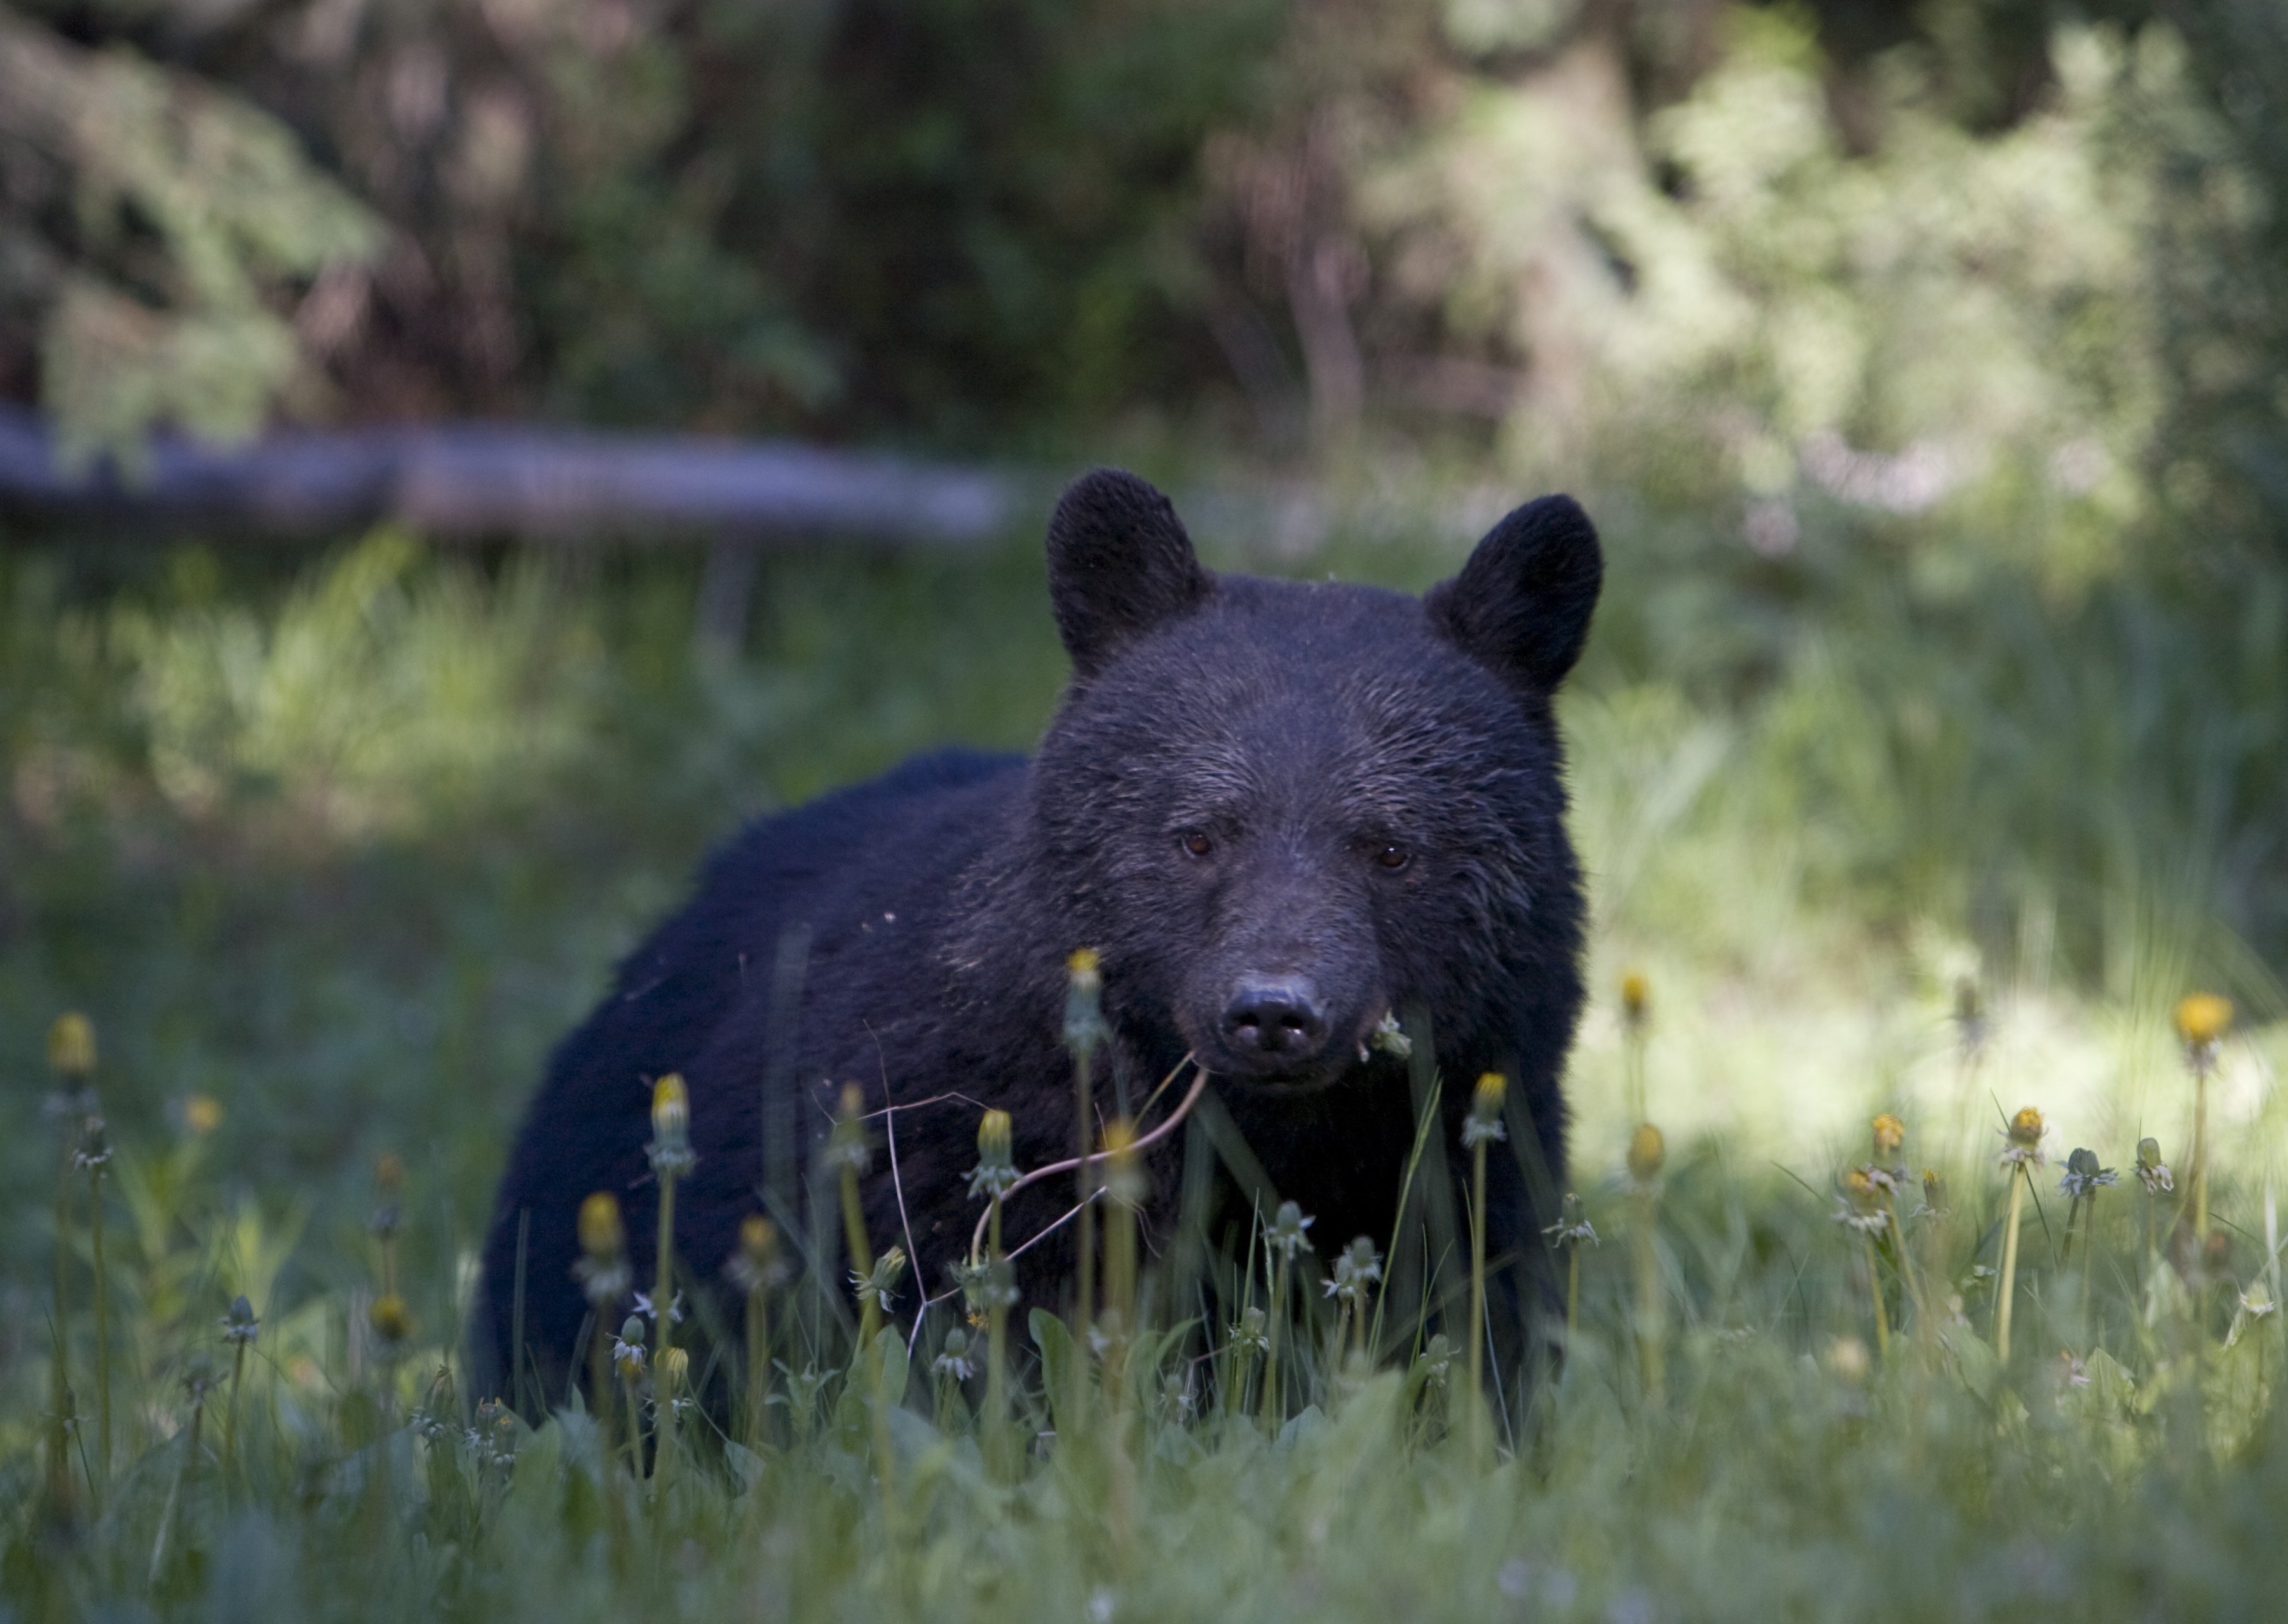 Black Bear Euthanized After Fatally Mauling Woman in Rare Attack